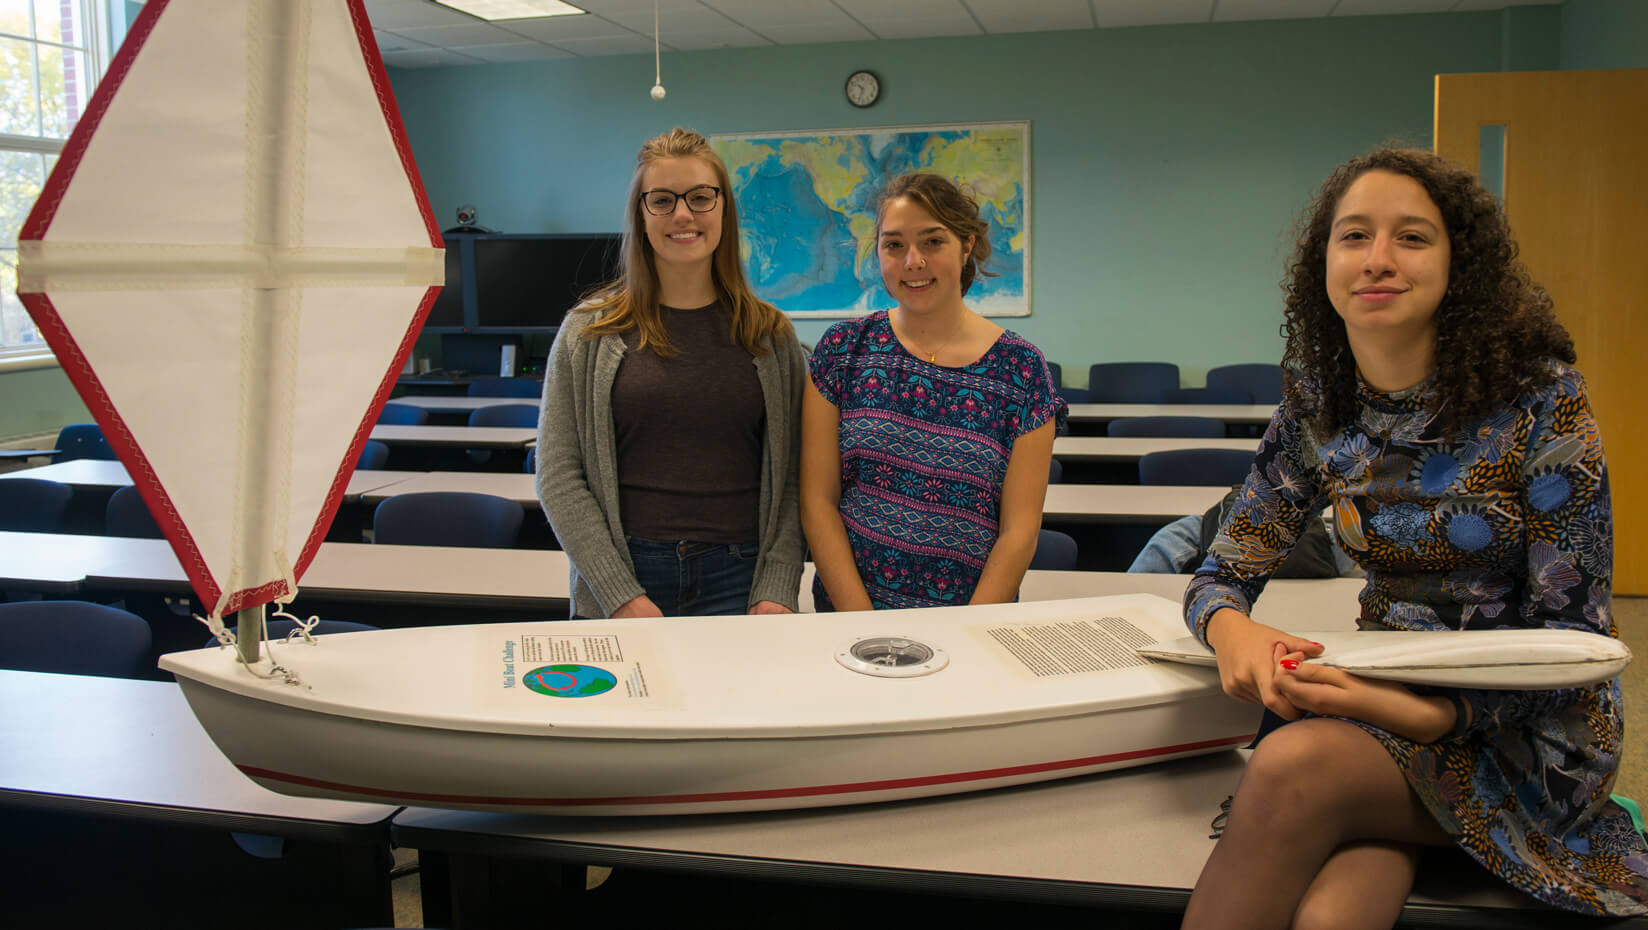 Members of the Marine Sciences Club post with a miniboat